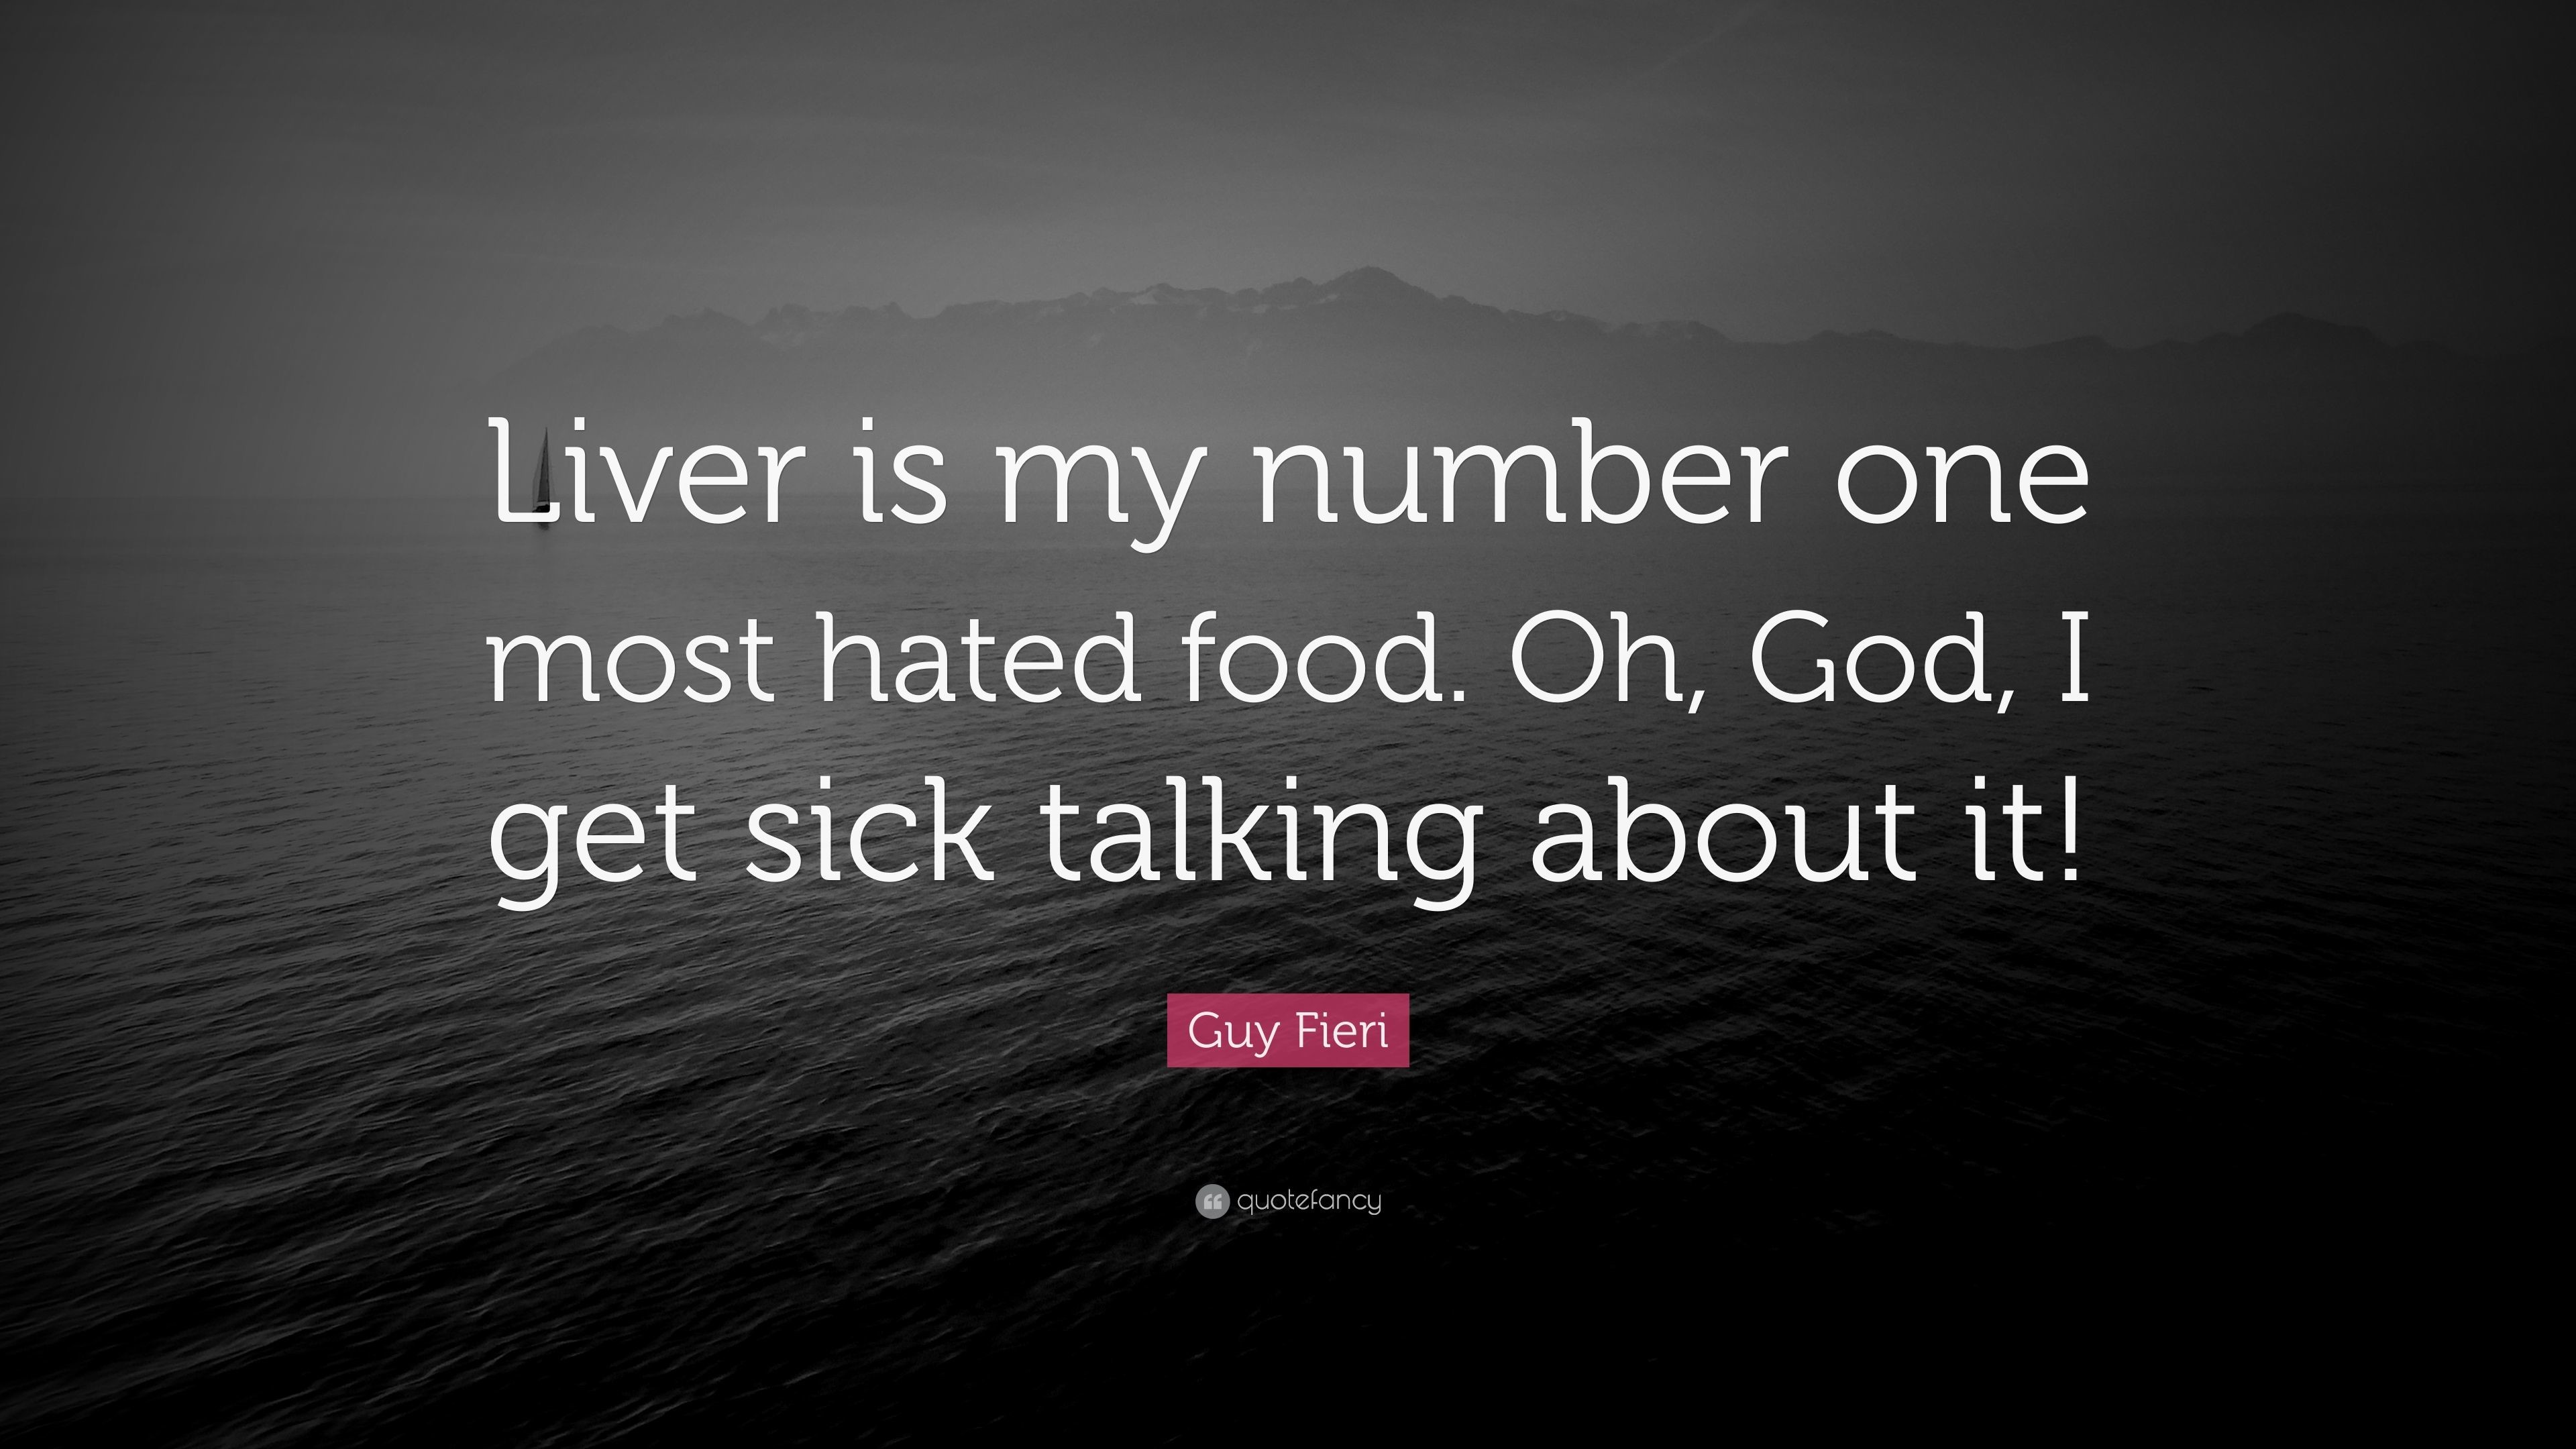 3840x2160 Guy Fieri Quote: “Liver is my number one most hated food. Oh,